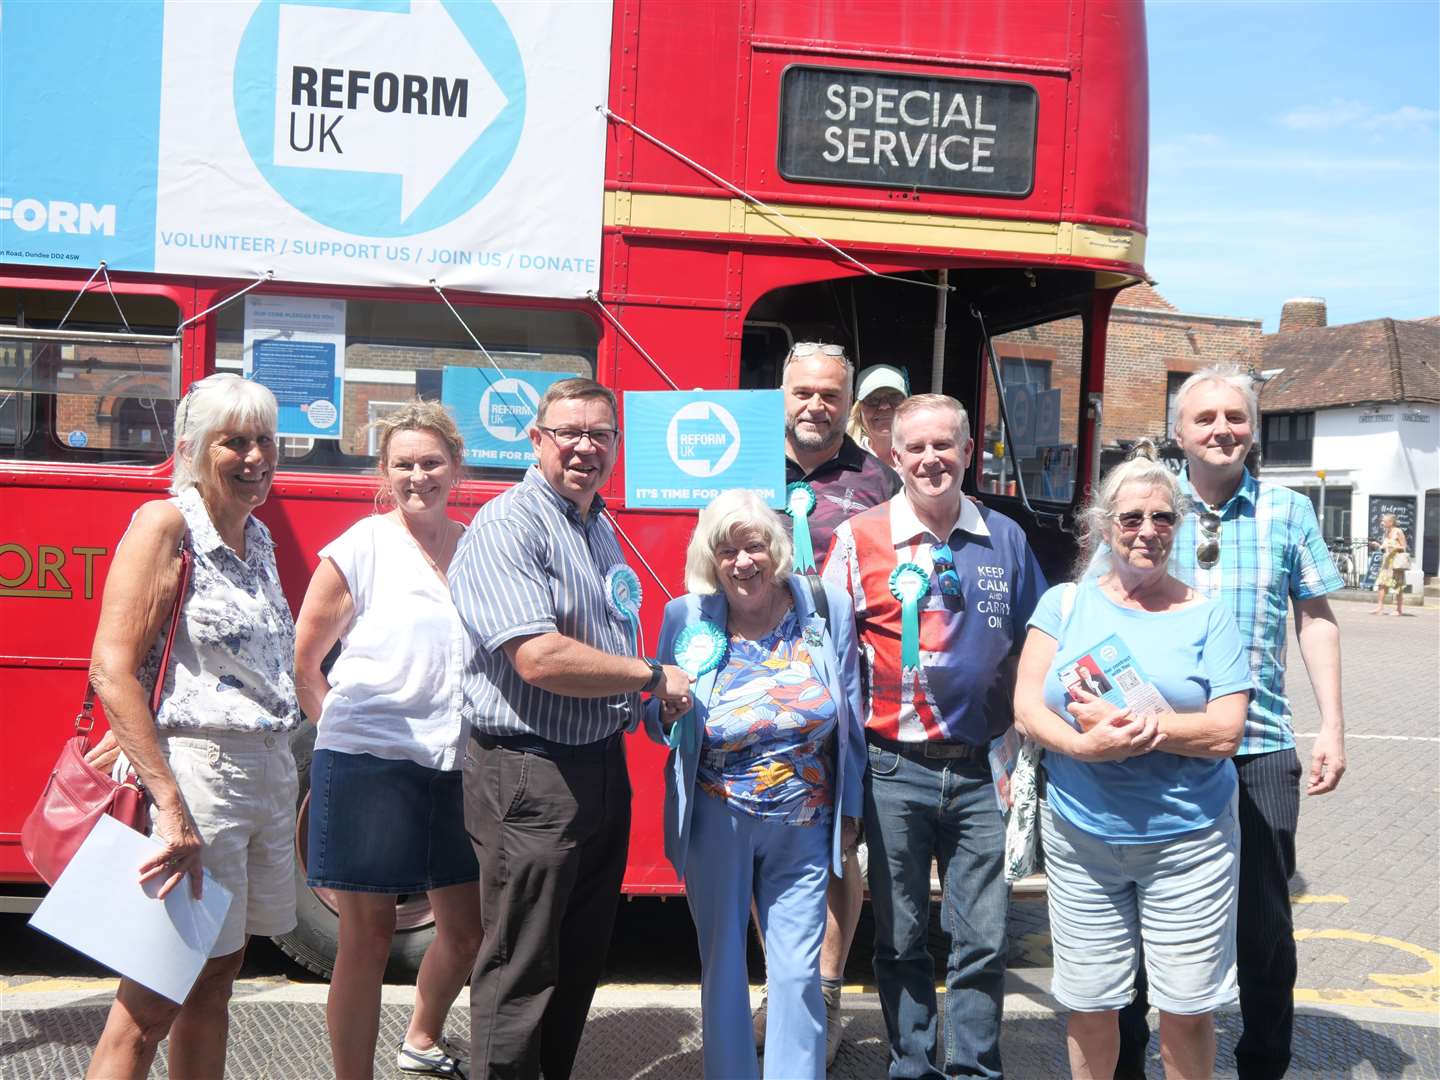 Maidstone and Malling Reform UK candidate Paul Thomas with former MP Ann Widdecombe and supporters